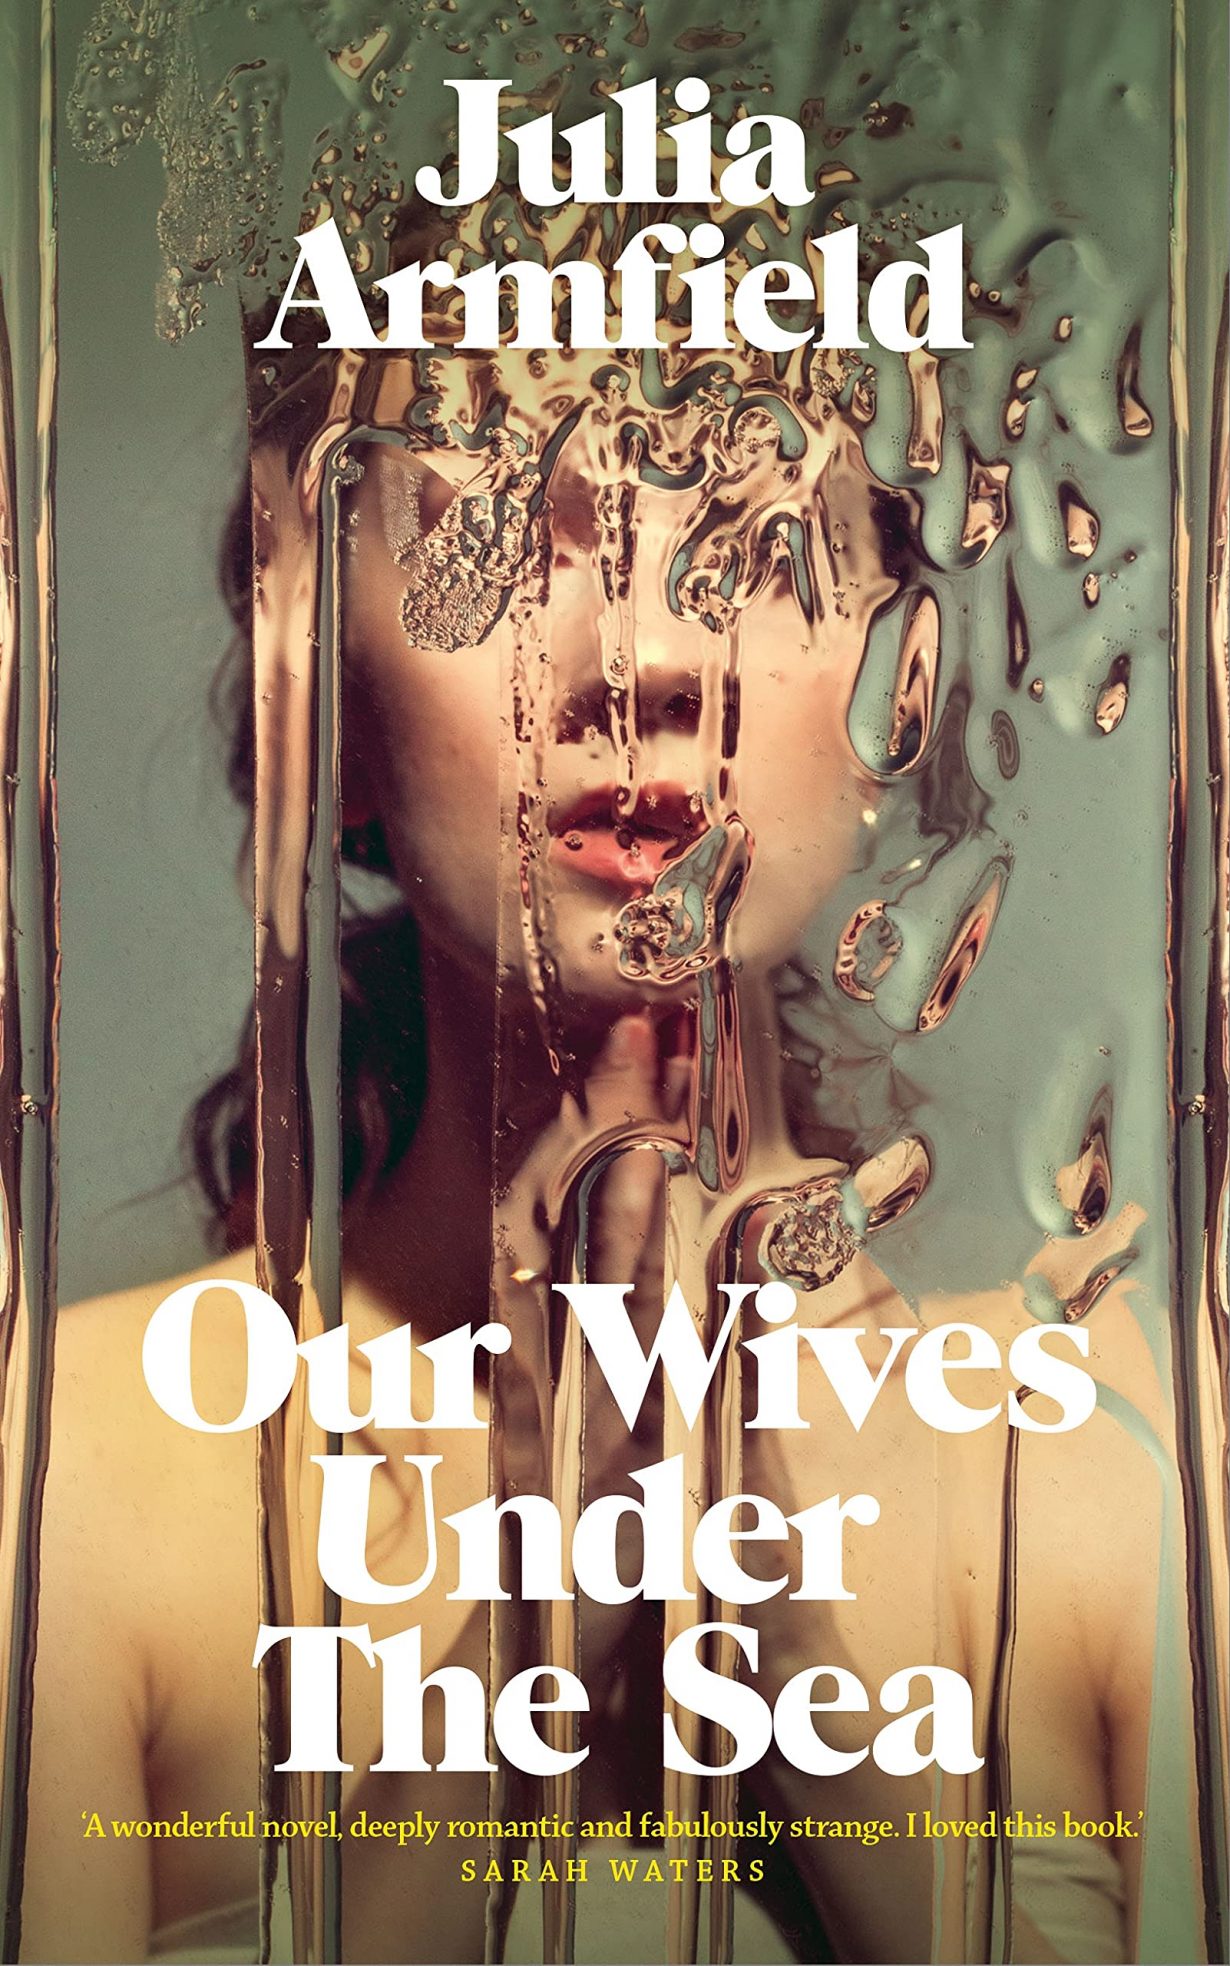 Julia Armfield, Our Wives Under the Sea, 2022 (UK book cover)